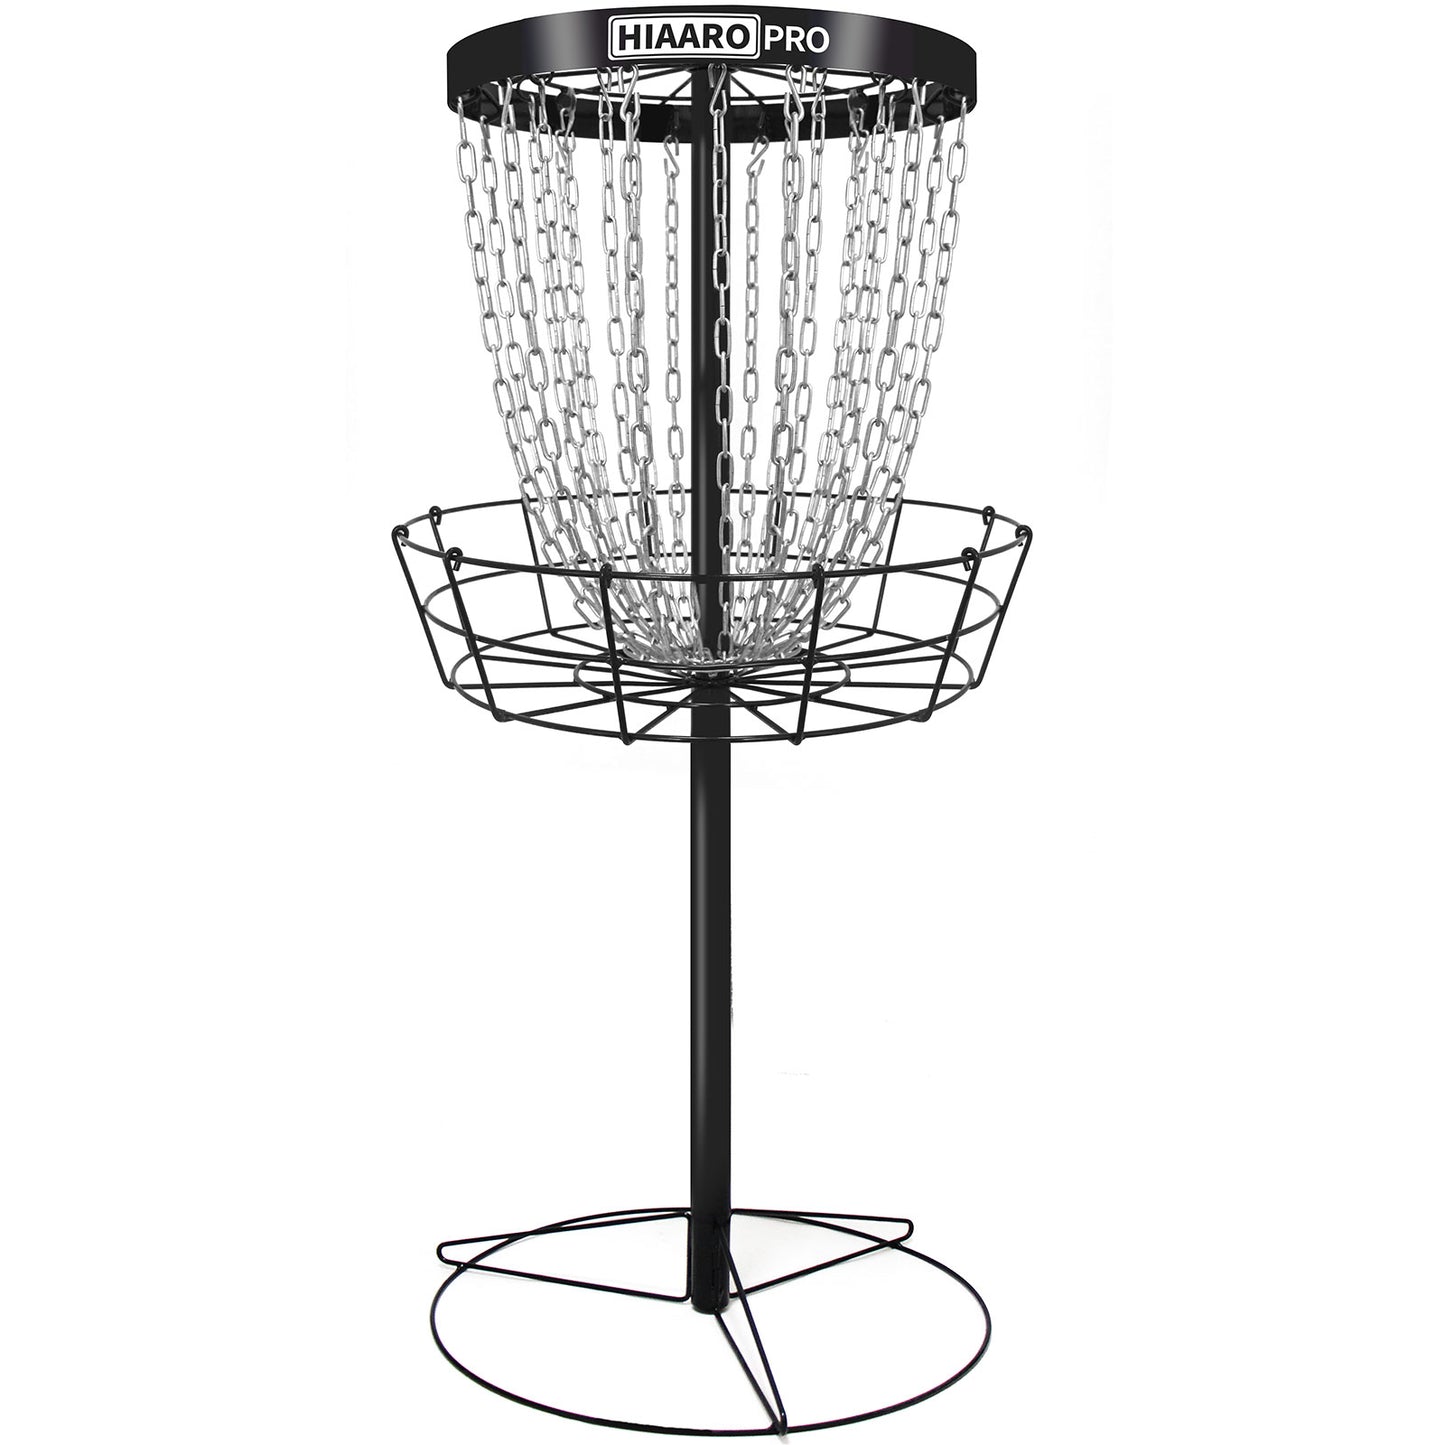 【PDGA Approved】 PRO Disc Golf Basket, Portable Disc Golf Target with Heavy Duty 24 Chains, Professional Frisbee Golf Basket Set